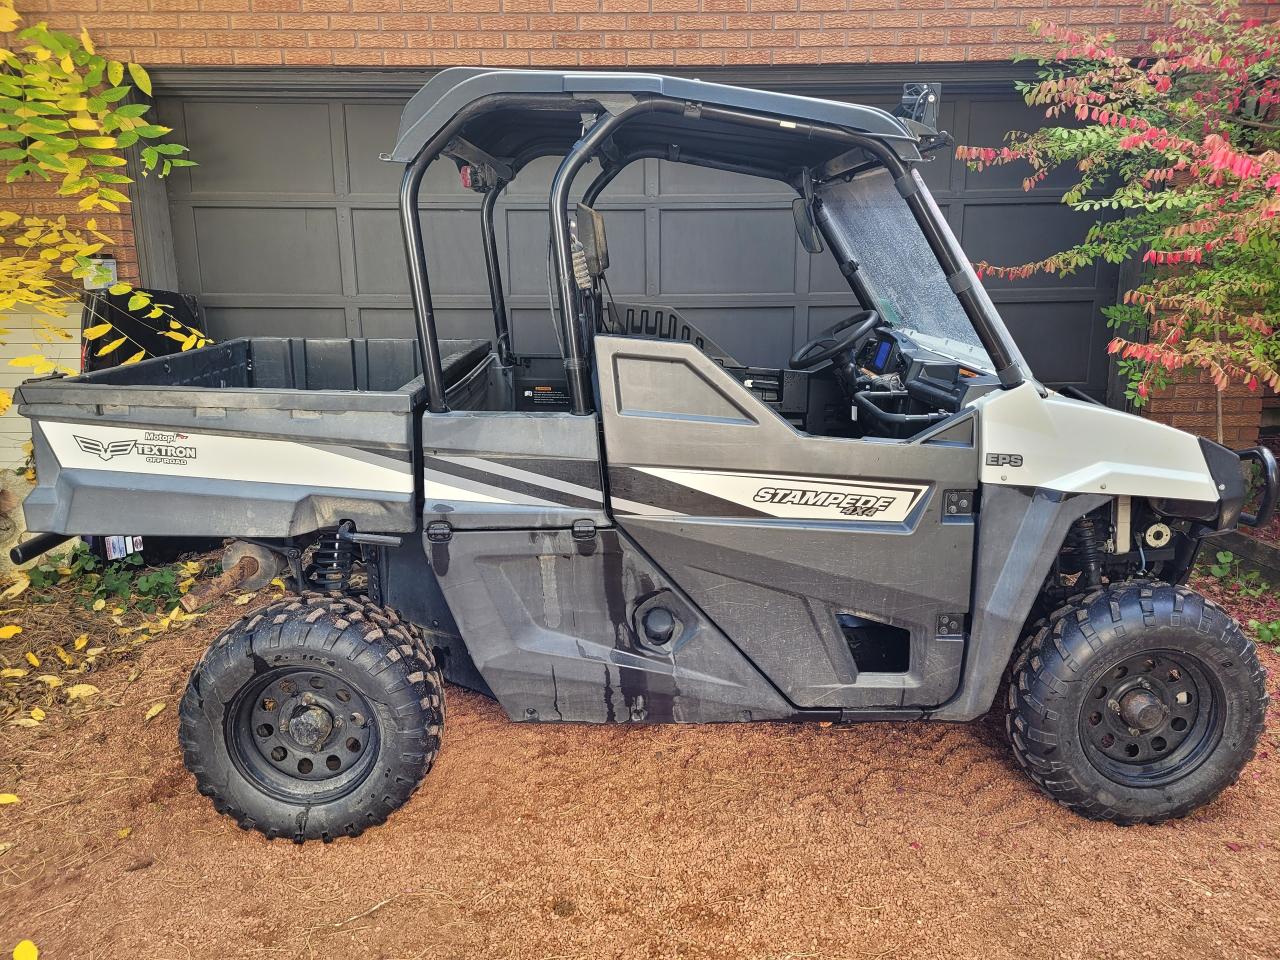 2017 Textron Stampede 900 EPS EPS XP LE 4x4 Financing Available, Trades Welcome! - Photo #5